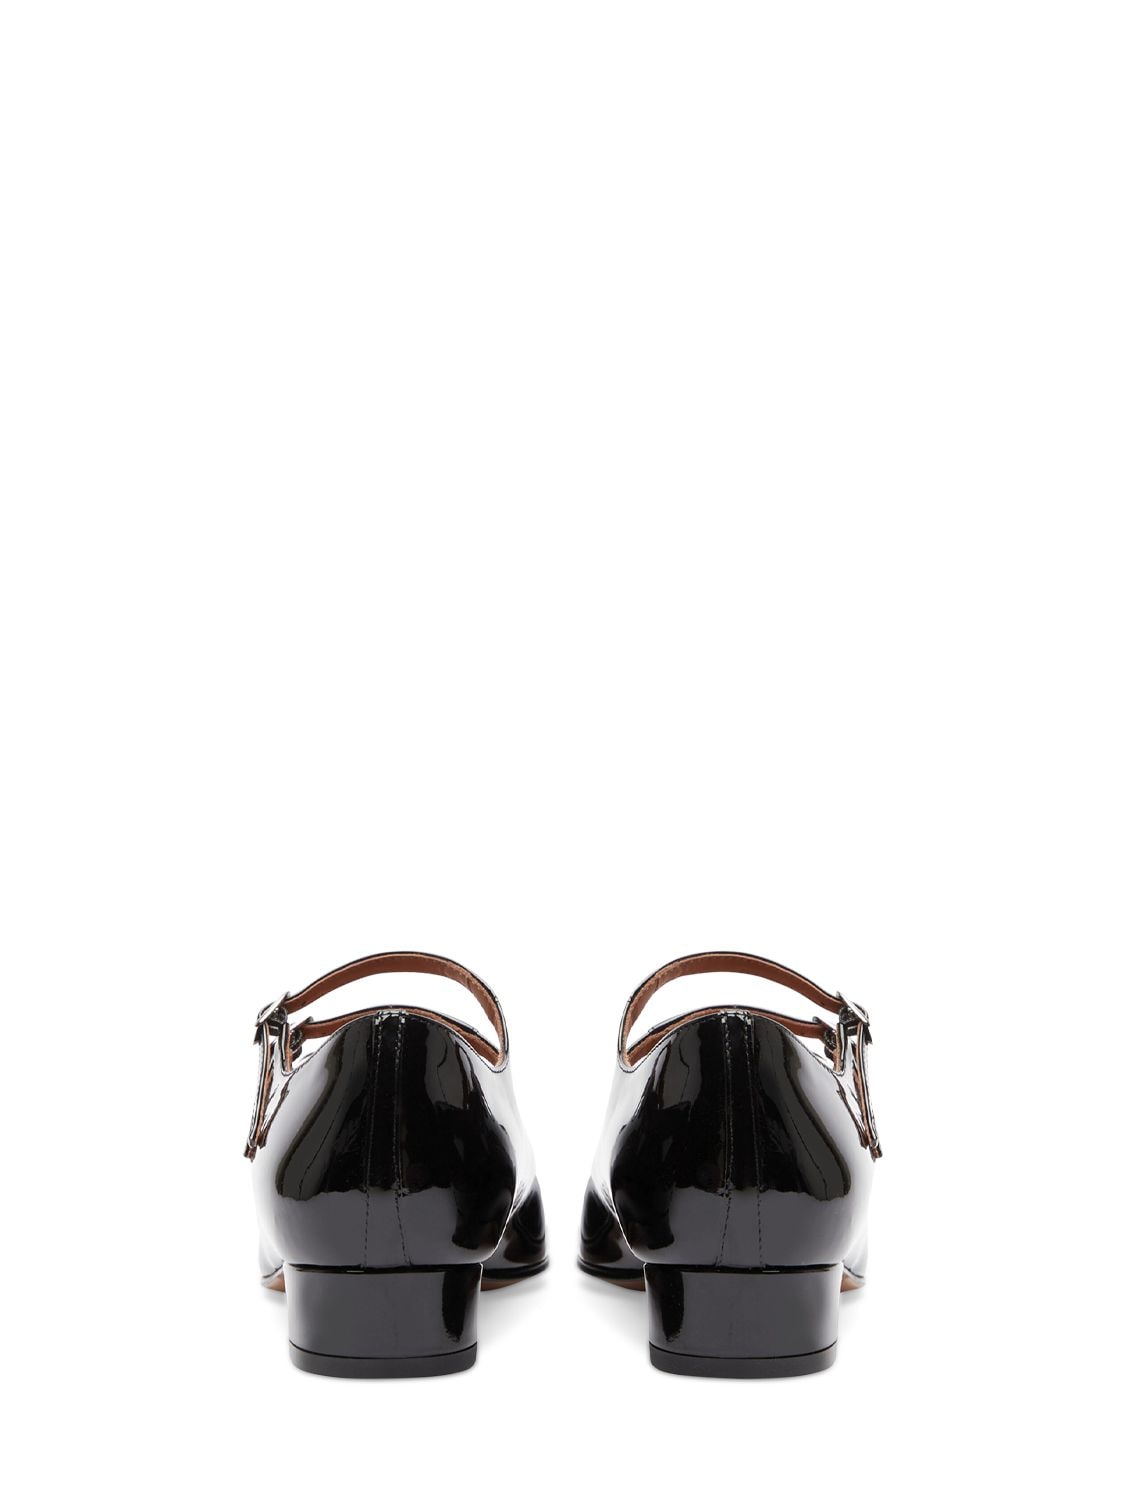 Shop Carel 20mm Ariana Patent Leather Pumps In Black